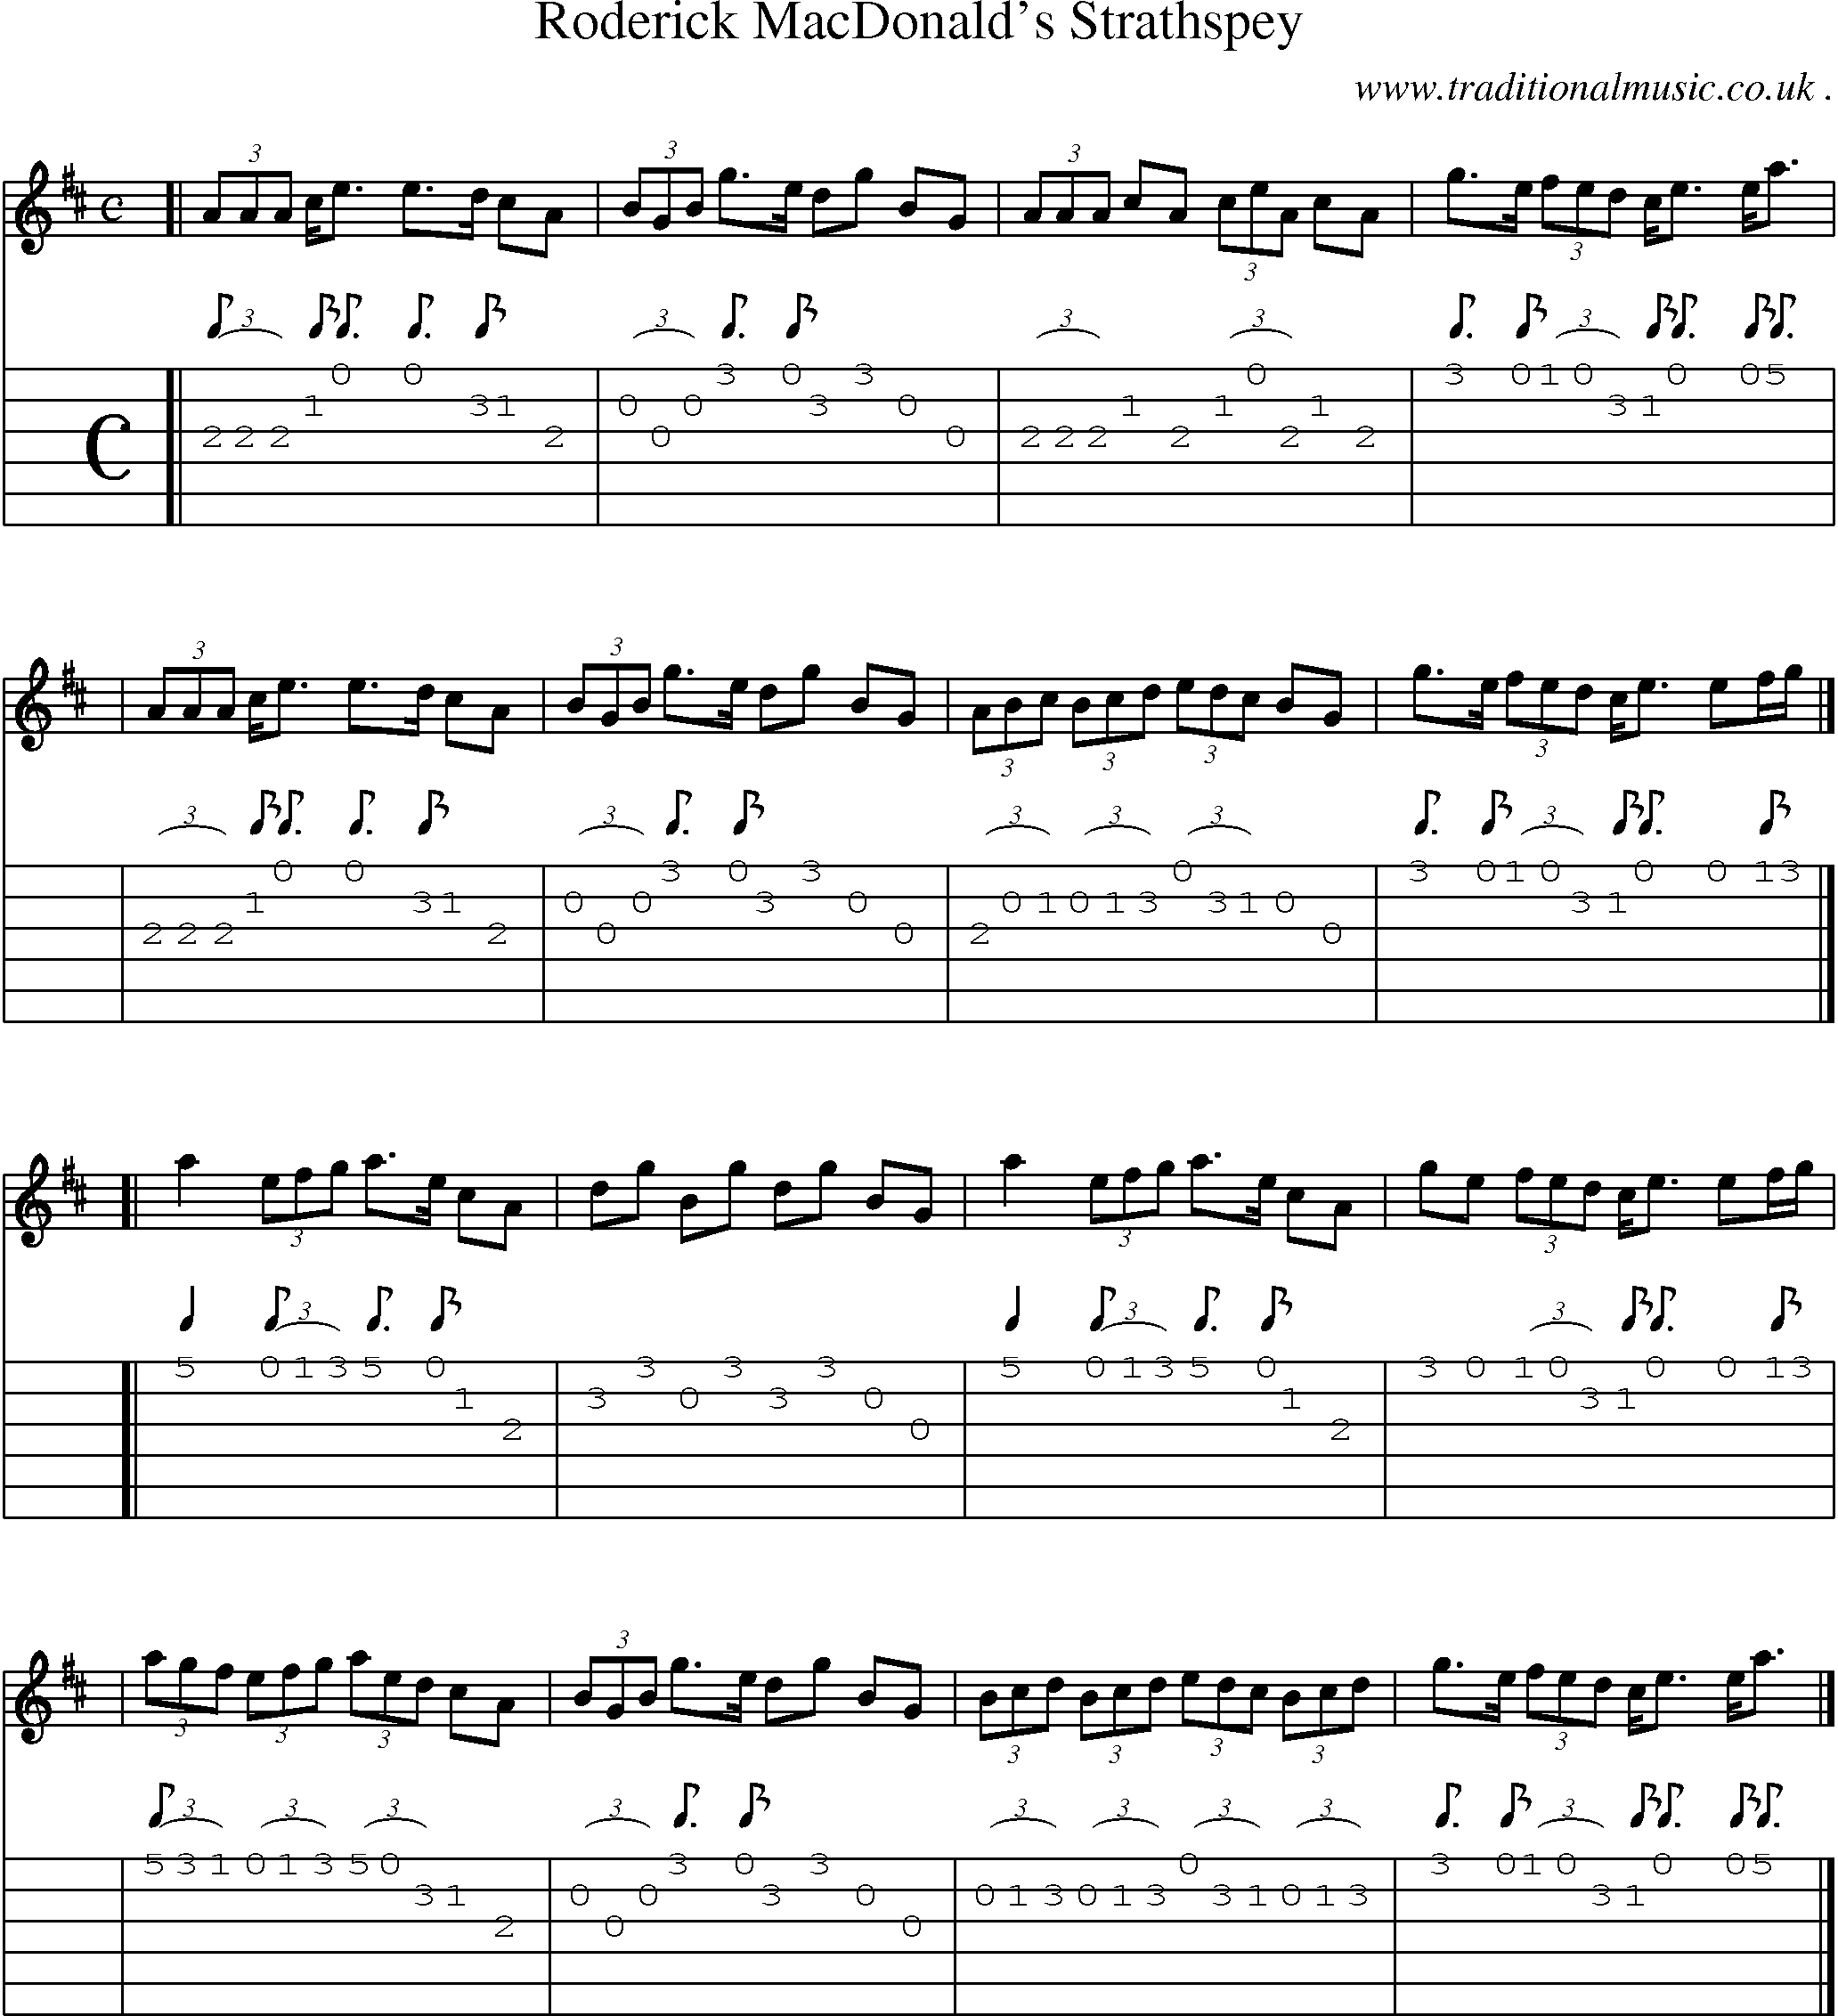 Sheet-music  score, Chords and Guitar Tabs for Roderick Macdonalds Strathspey